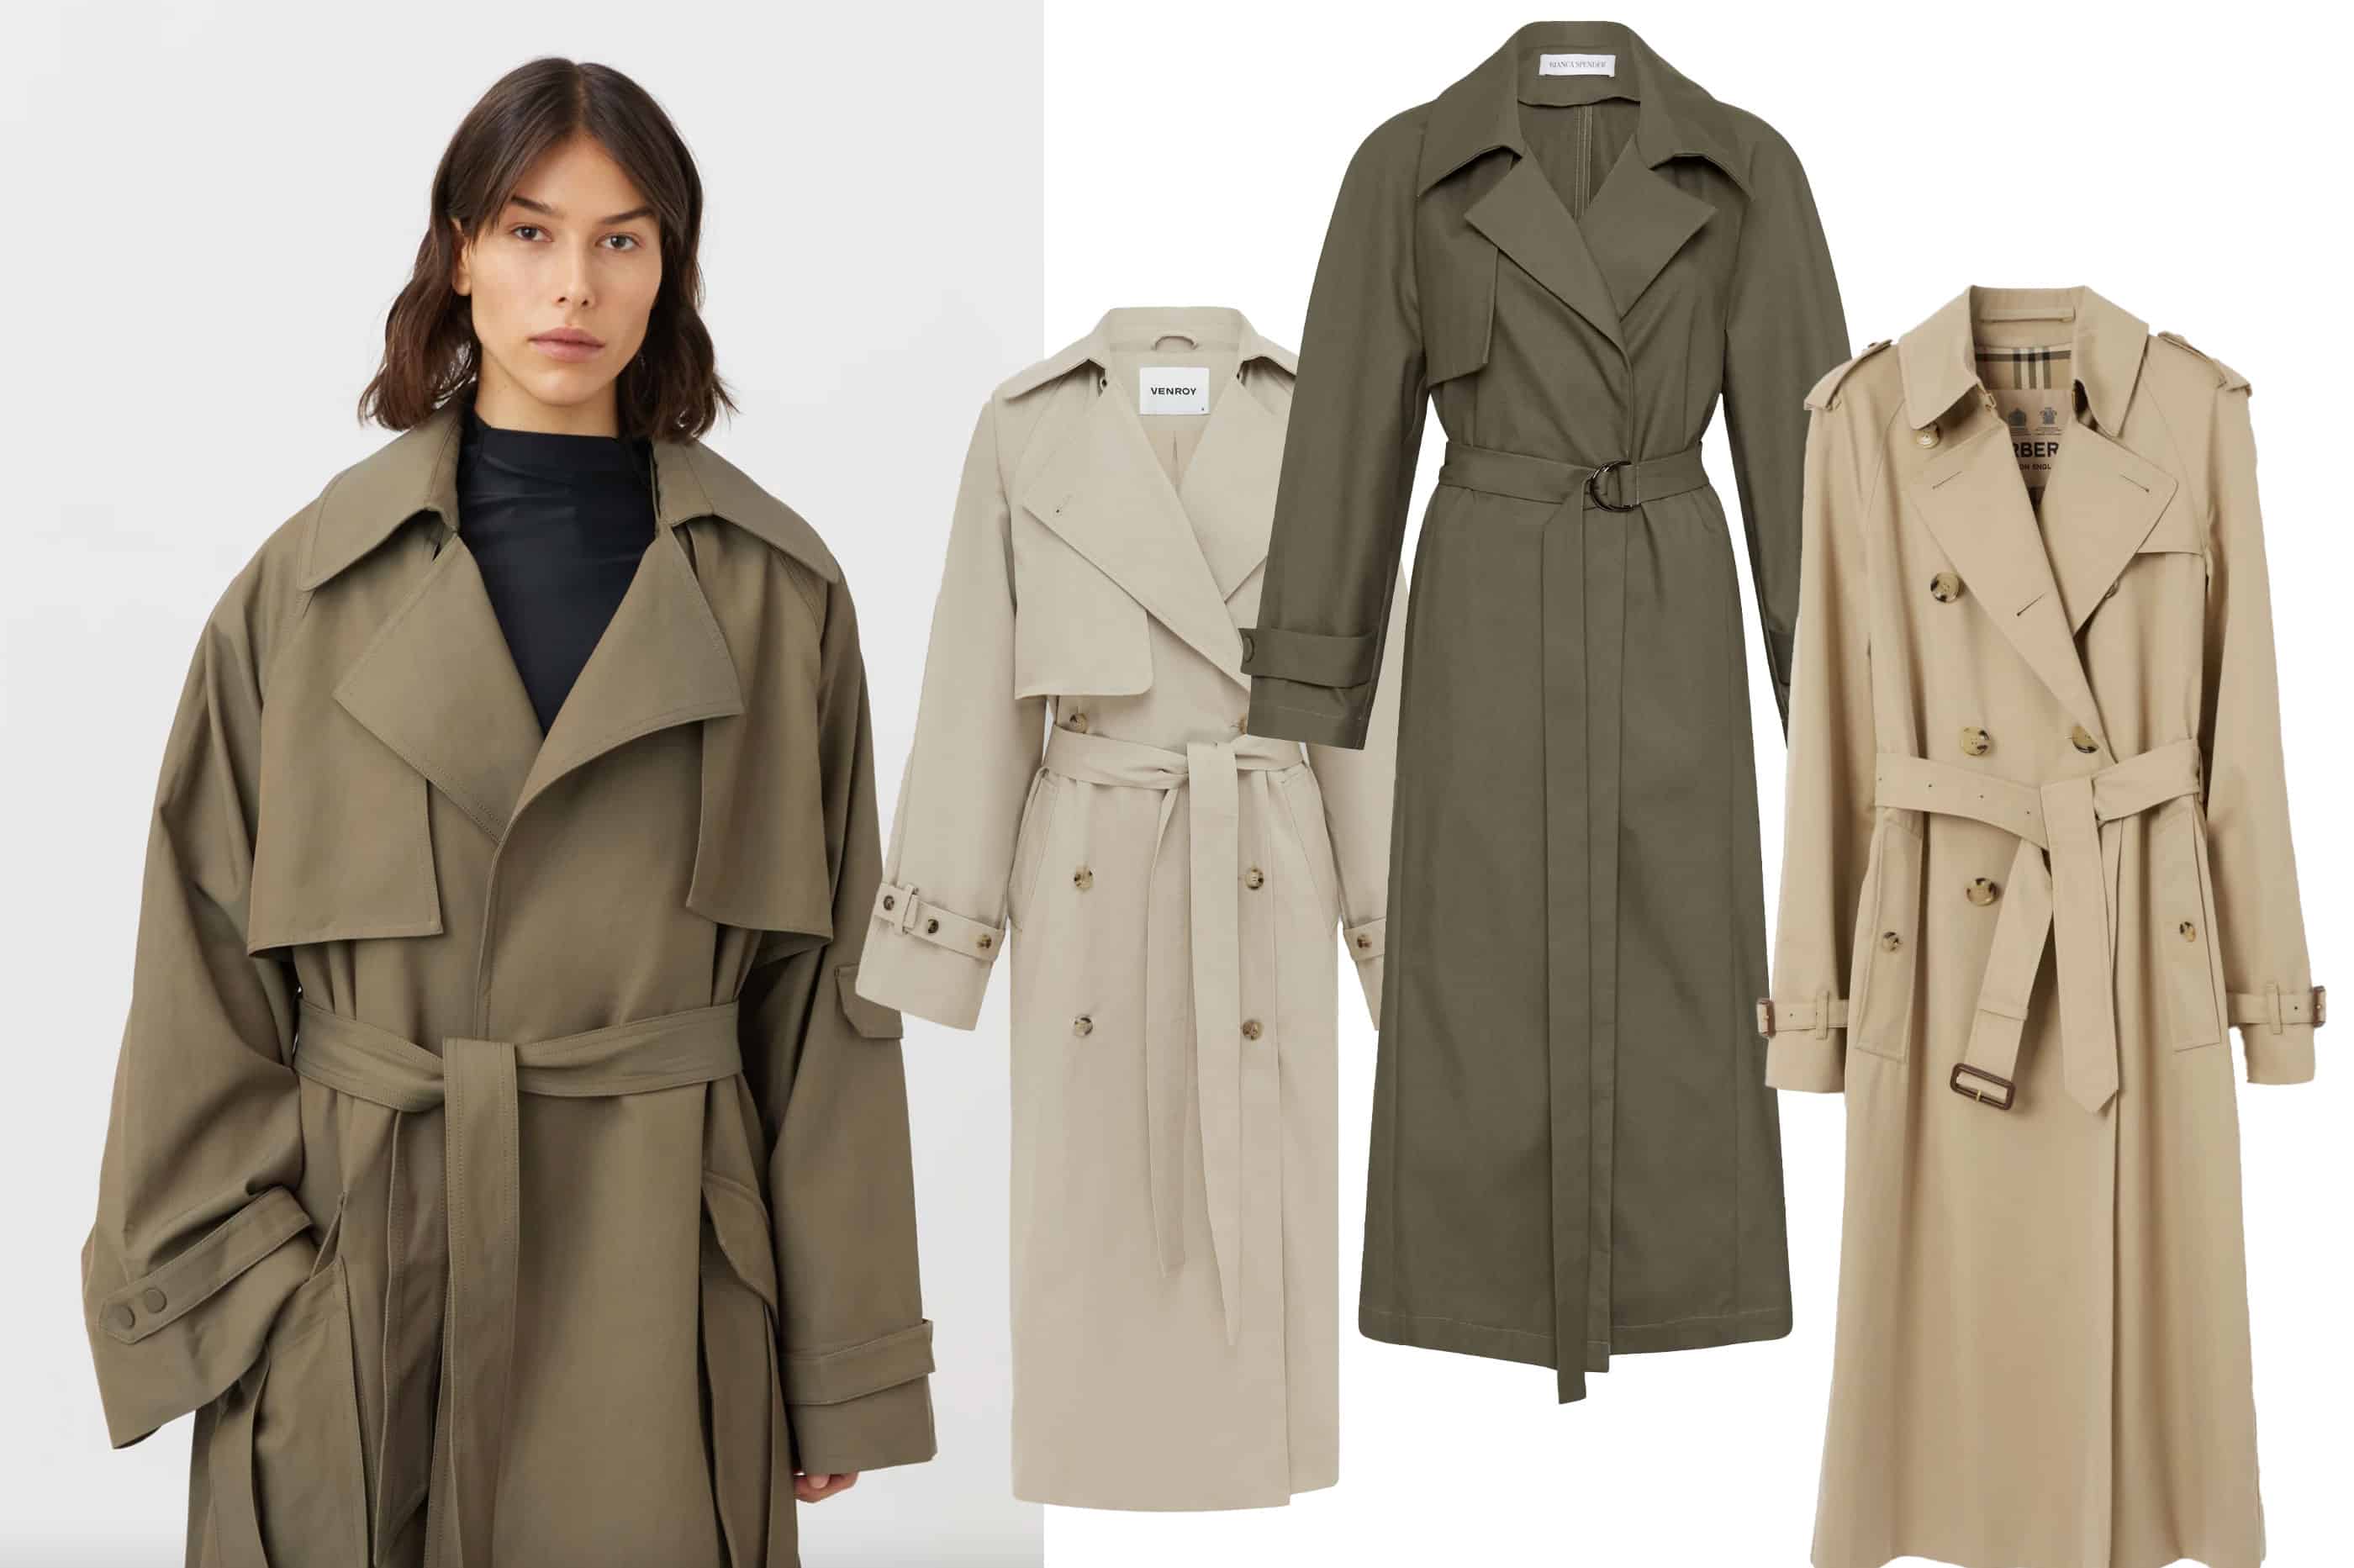 Winter jackets and coats to covet for the cooler season